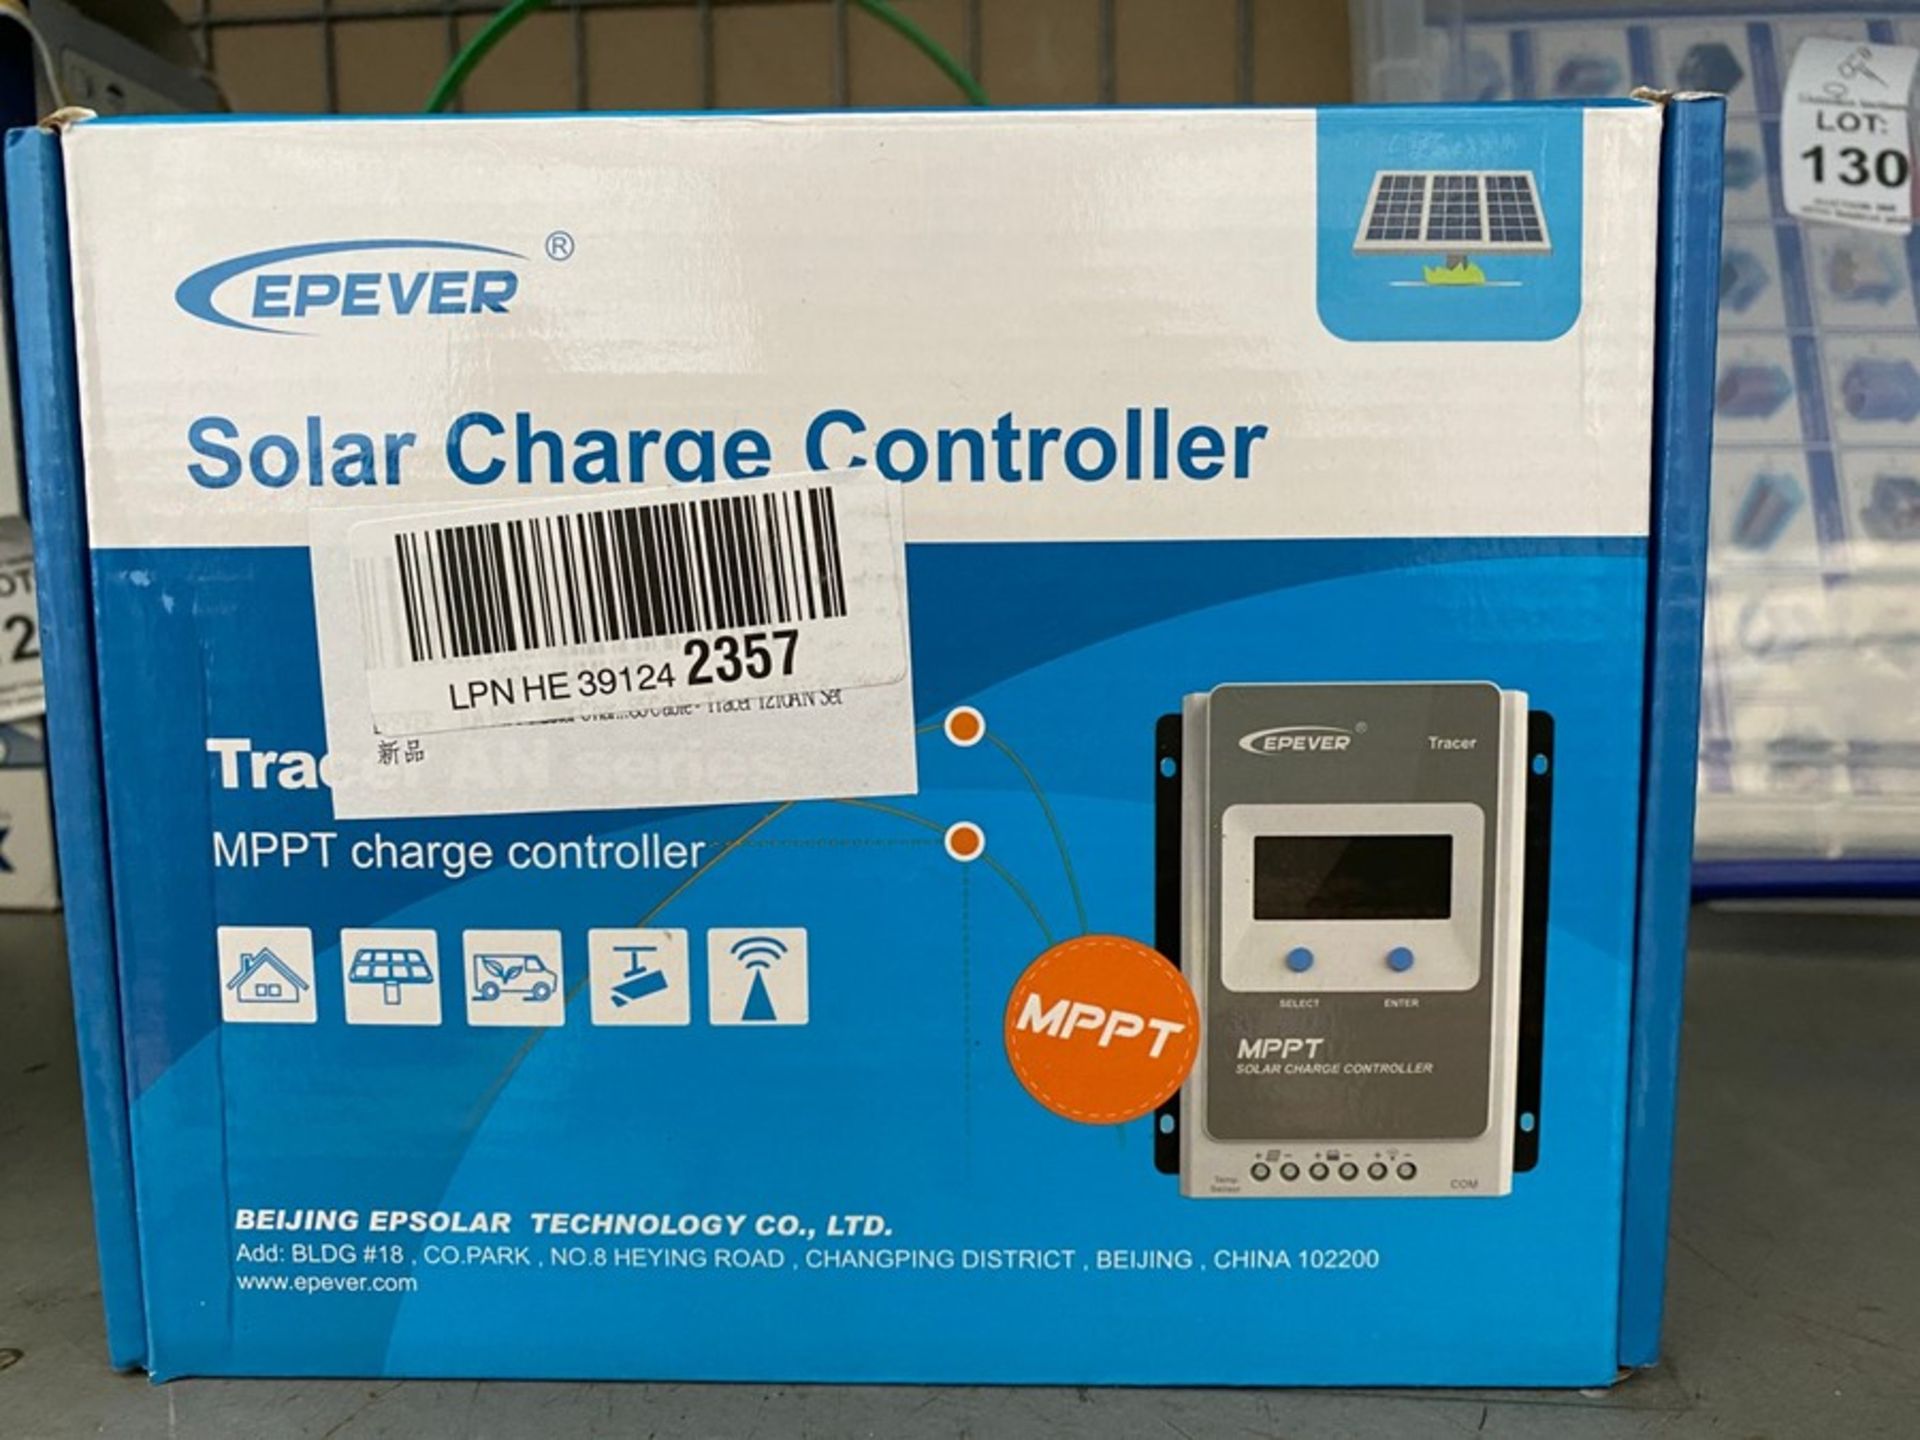 EPEVER TRACER AN SERIES SOLAR CHARGE CONTROLLER (EX-SHOP DISPLAY)